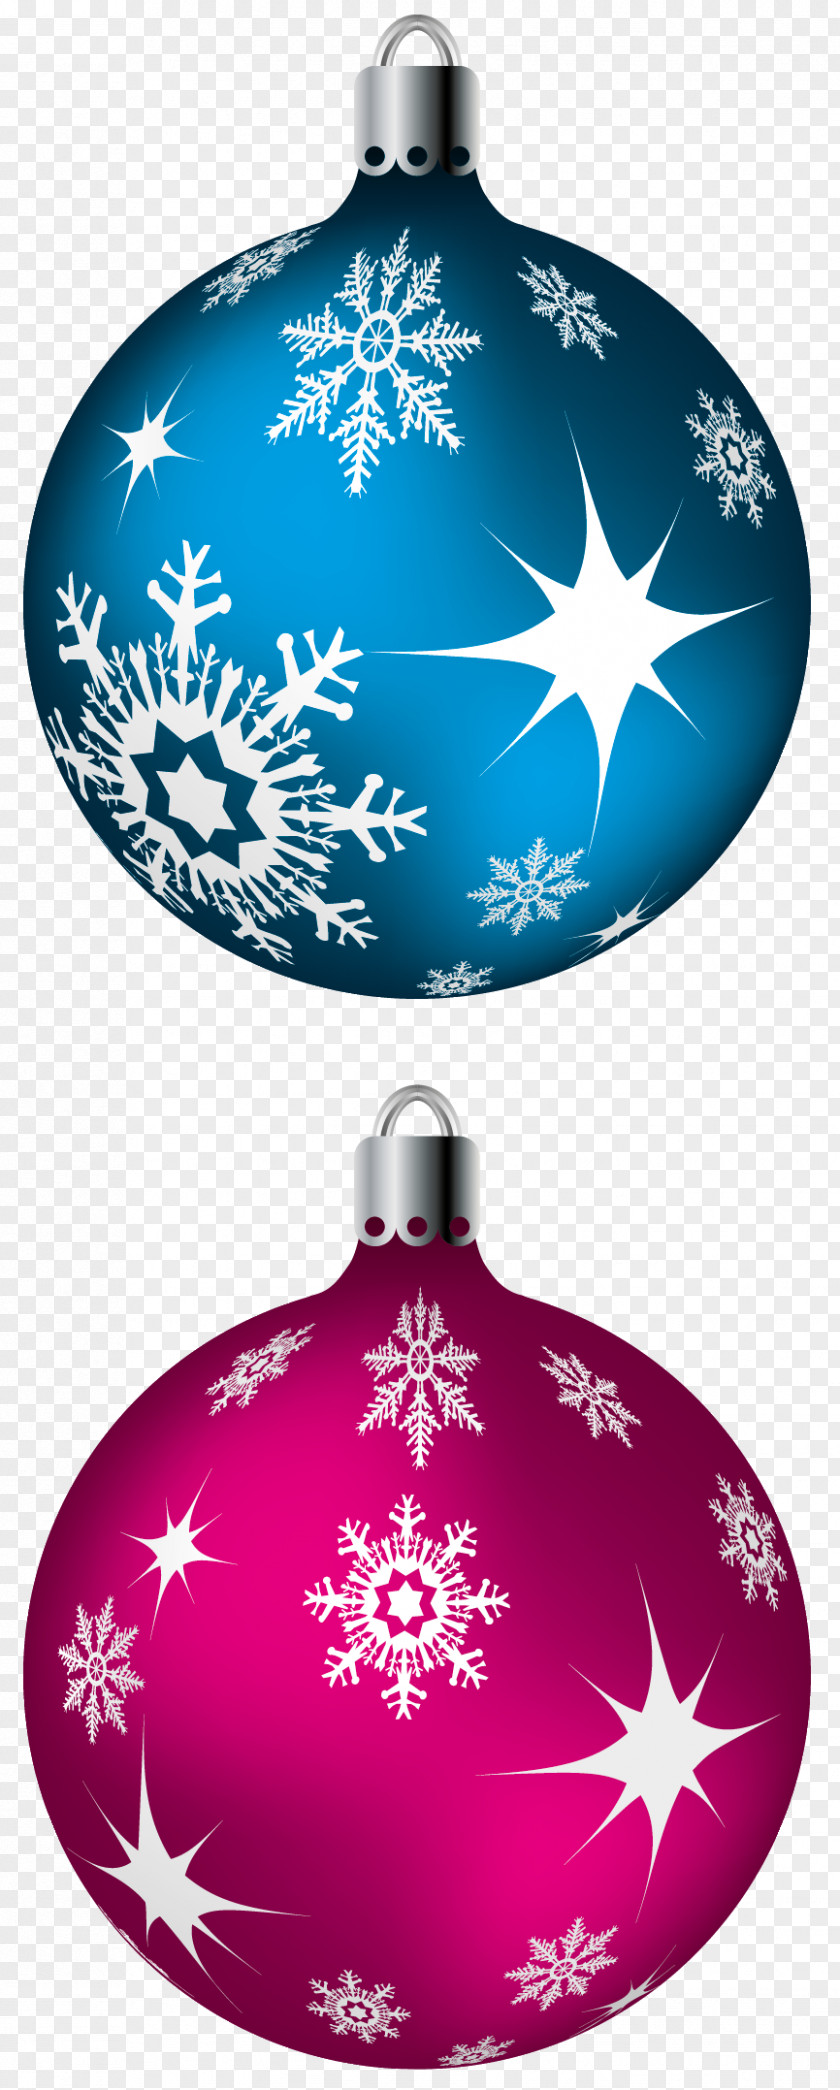 Crystal Ball Christmas Ornament Decoration Clip Art PNG